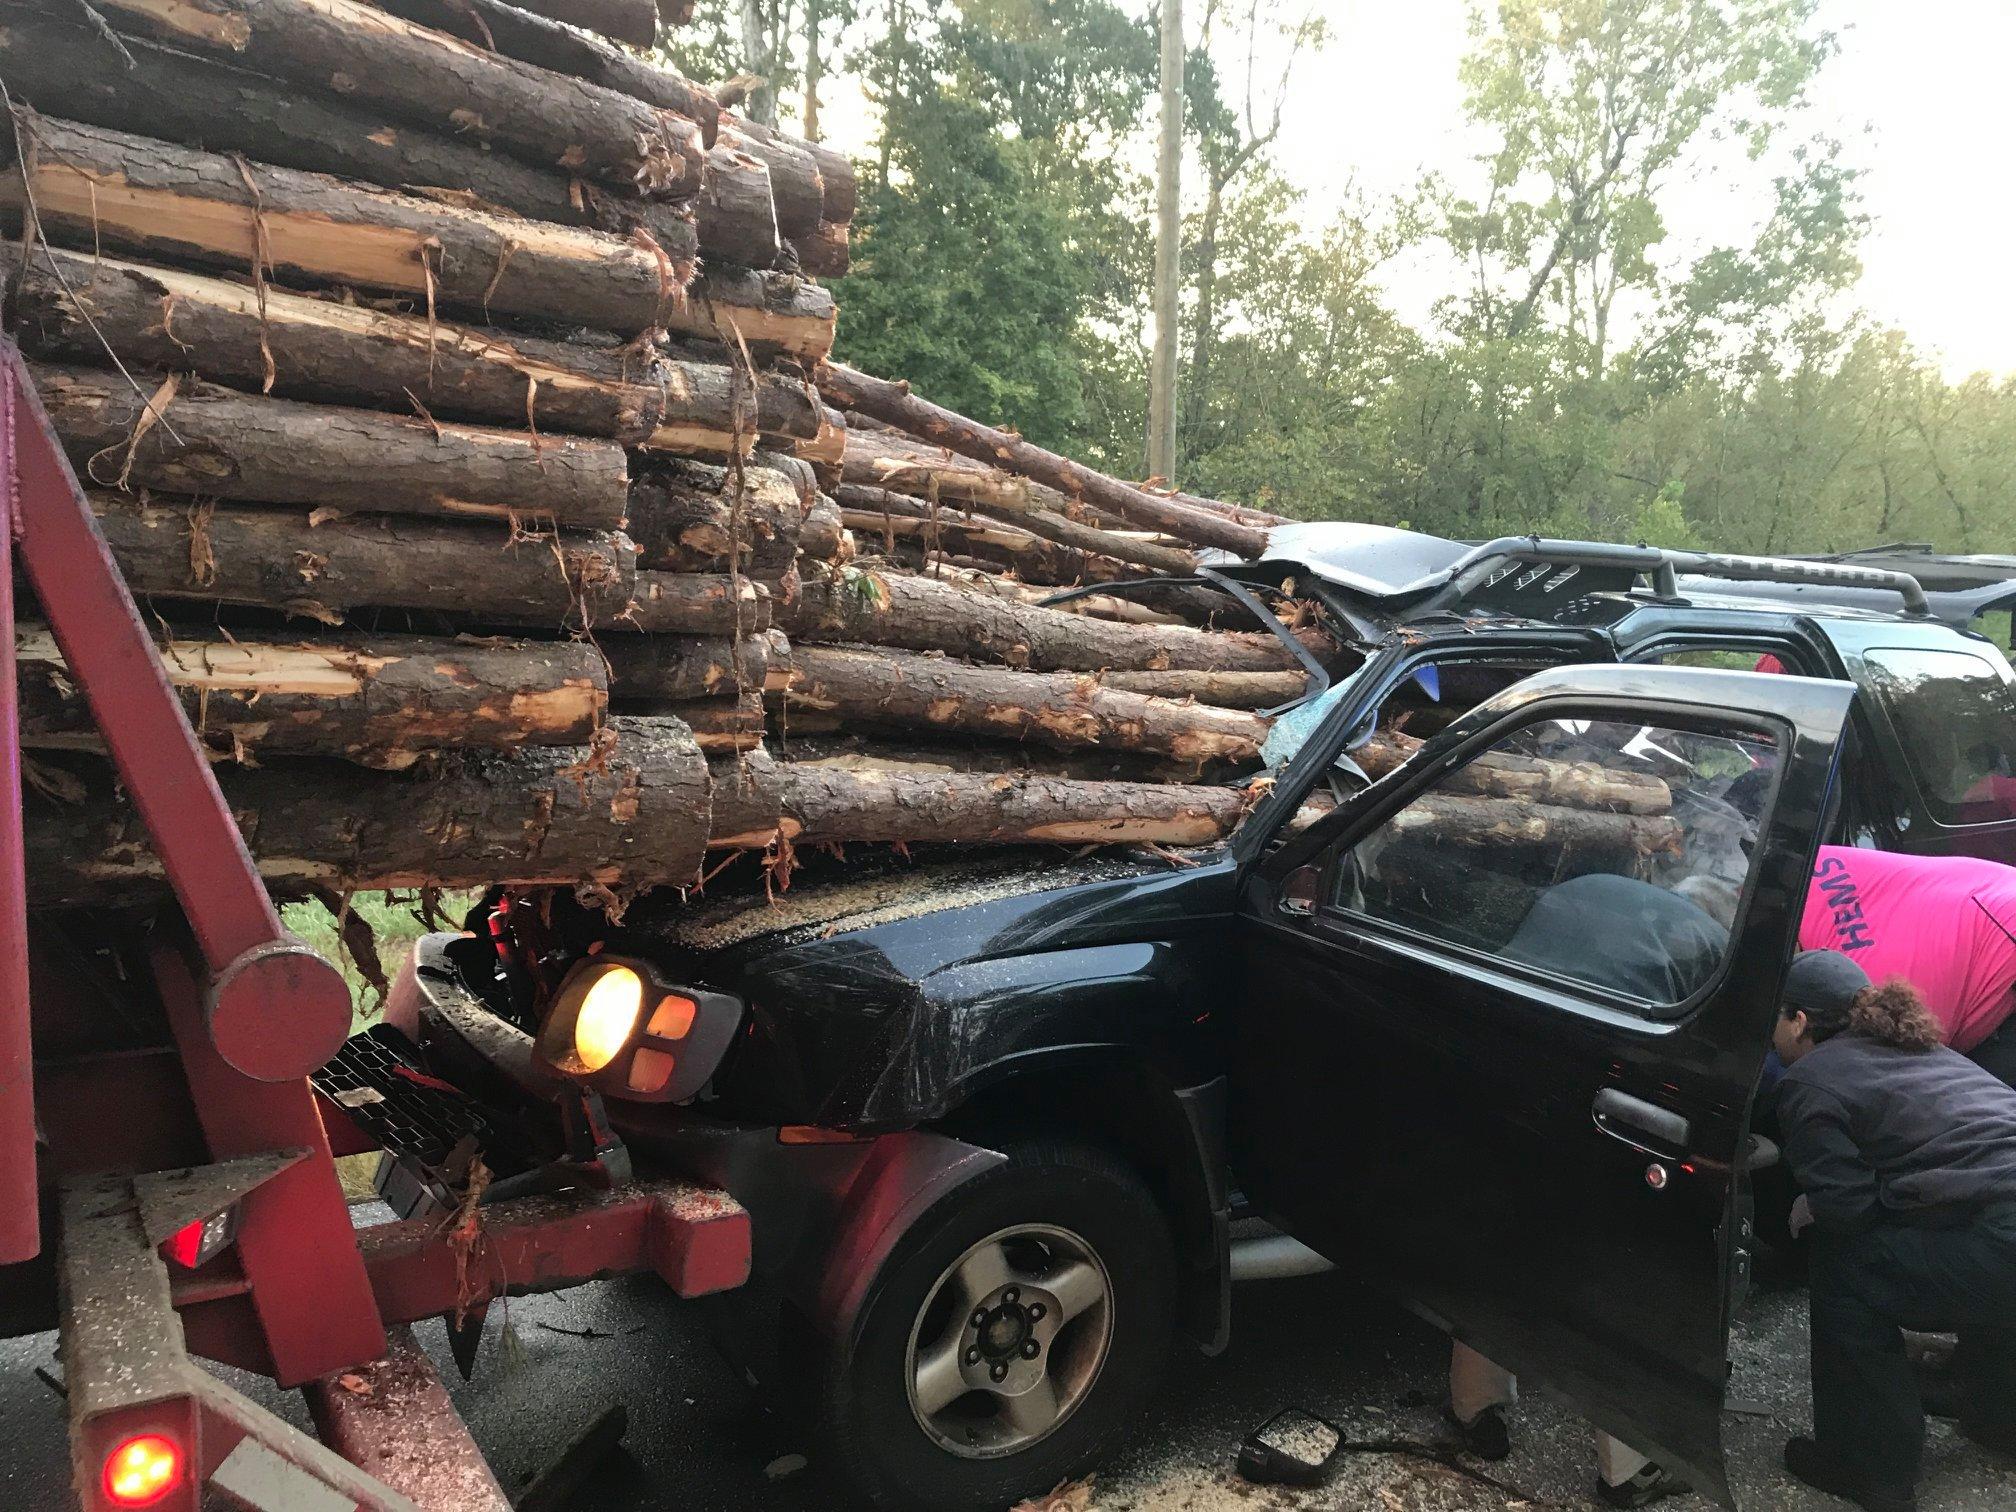 Driver's miracle escape after car impaled by logs 'when he crashed into truck while reaching for coffee'